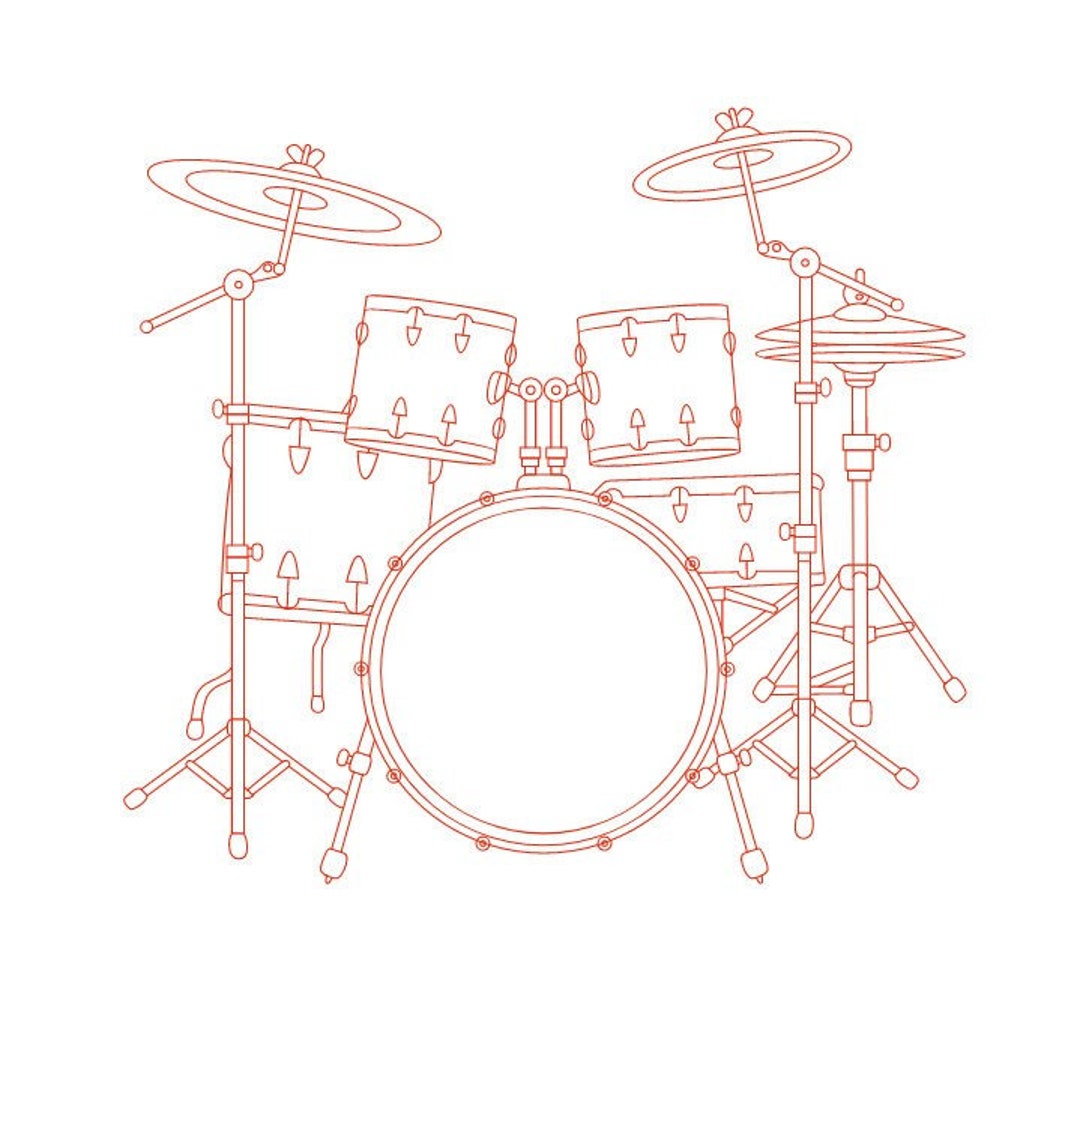 Drum setWhats in a drum set  Wikiversity